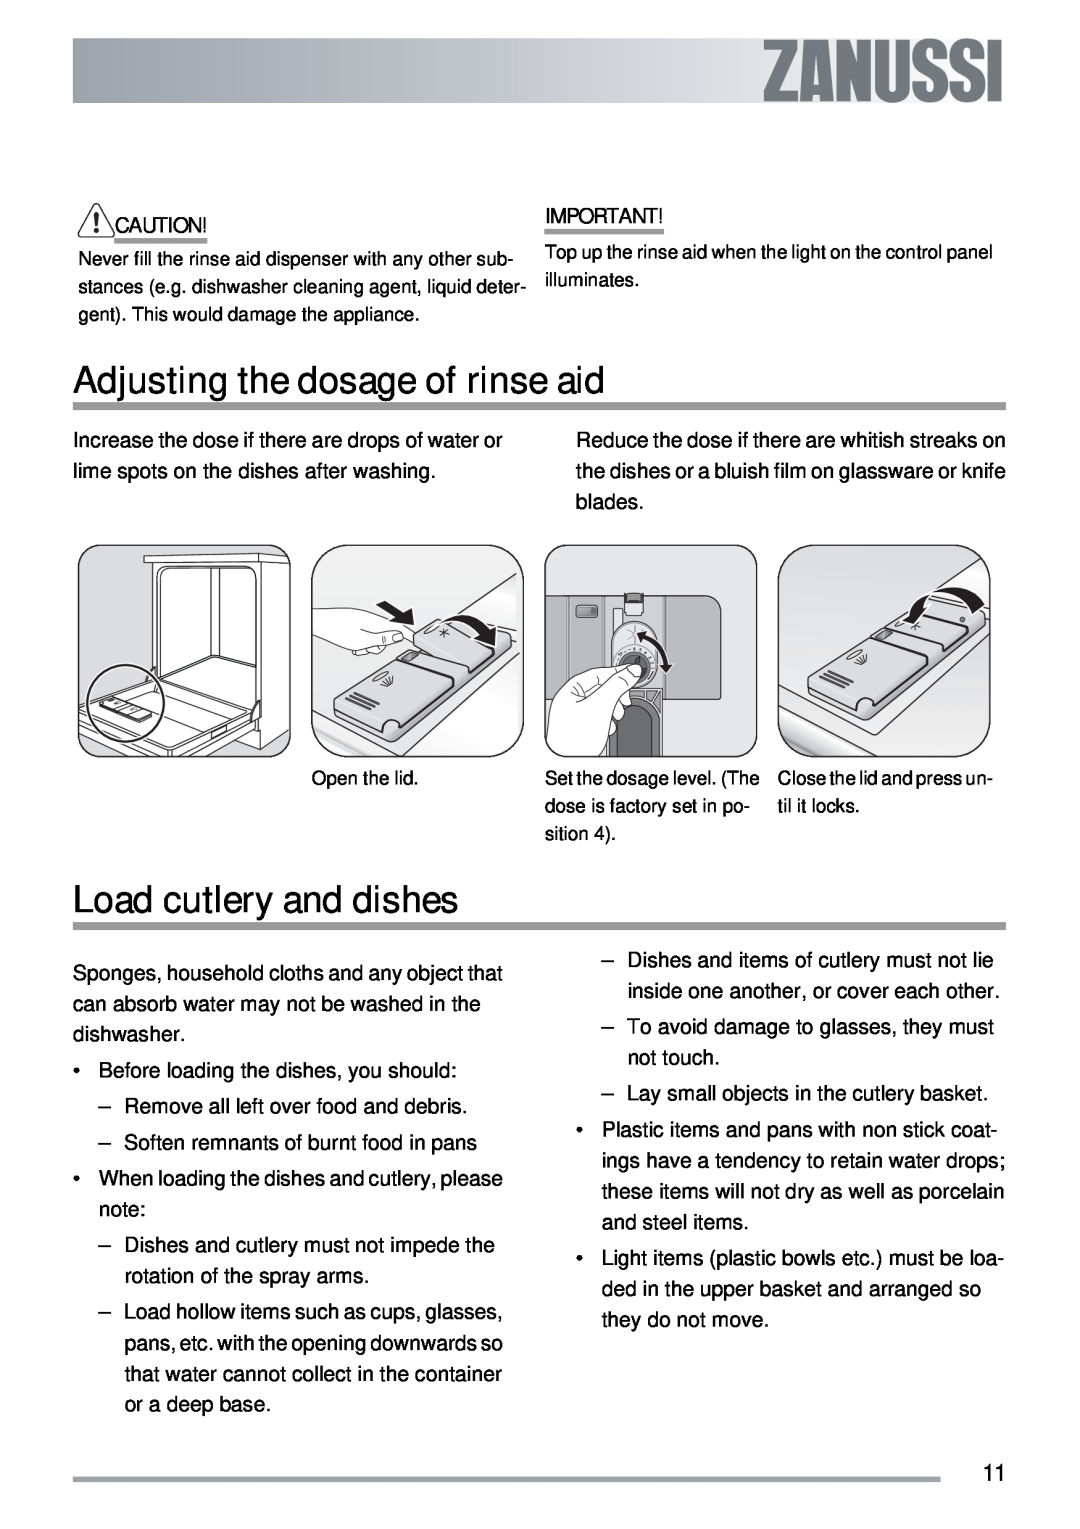 Zanussi ZSF 4143 user manual Adjusting the dosage of rinse aid, Load cutlery and dishes 